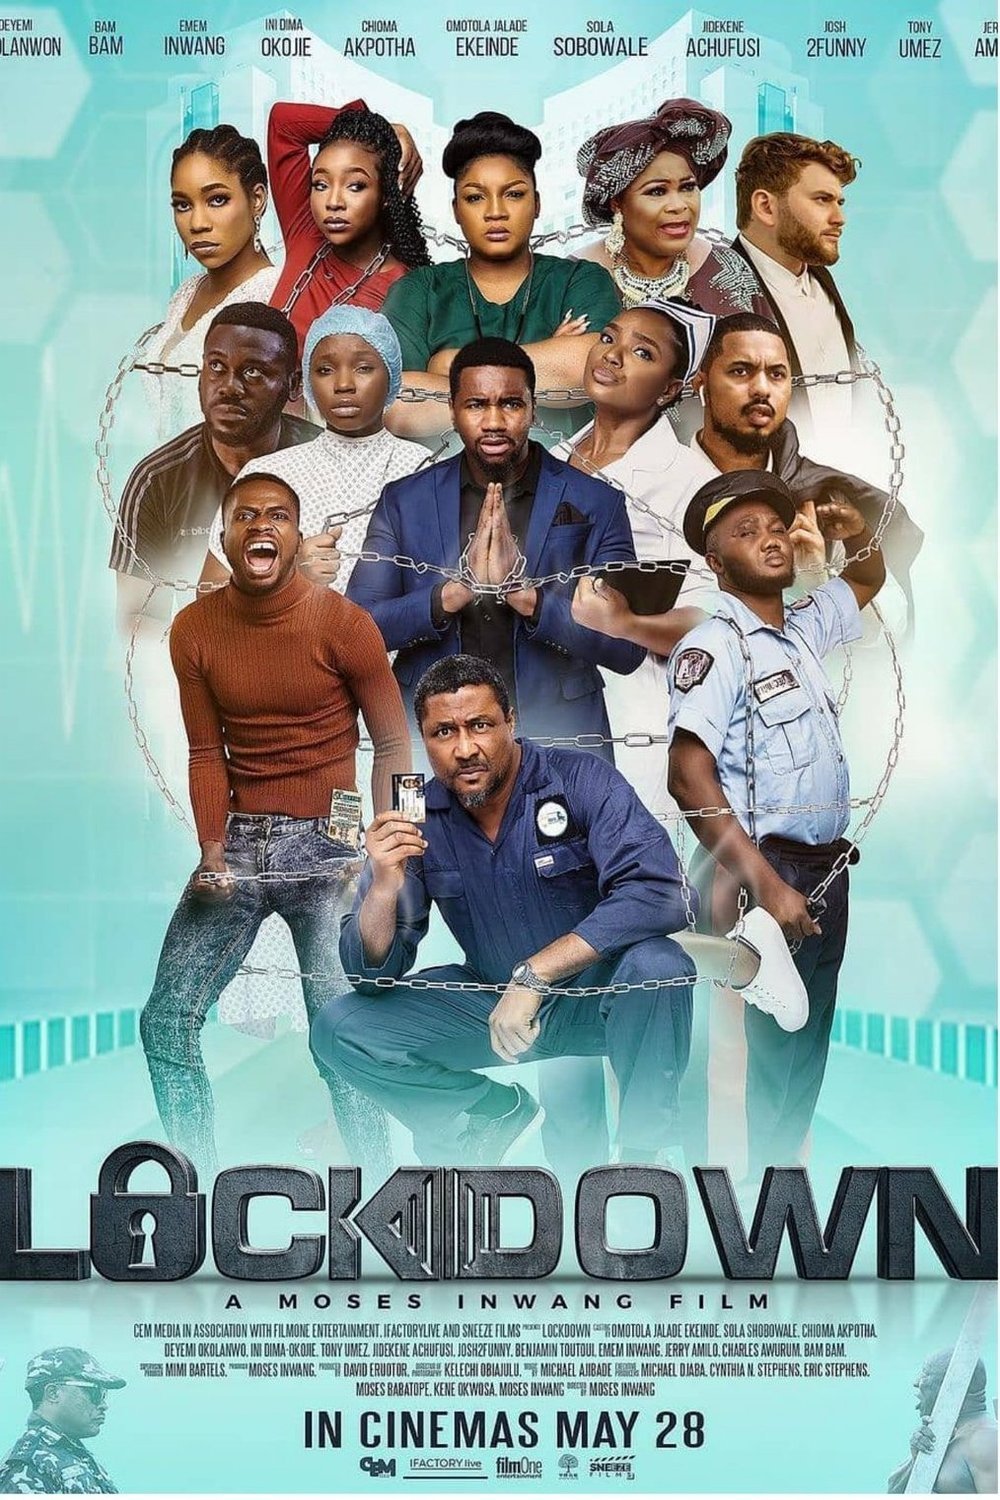 Poster of the movie Lockdown